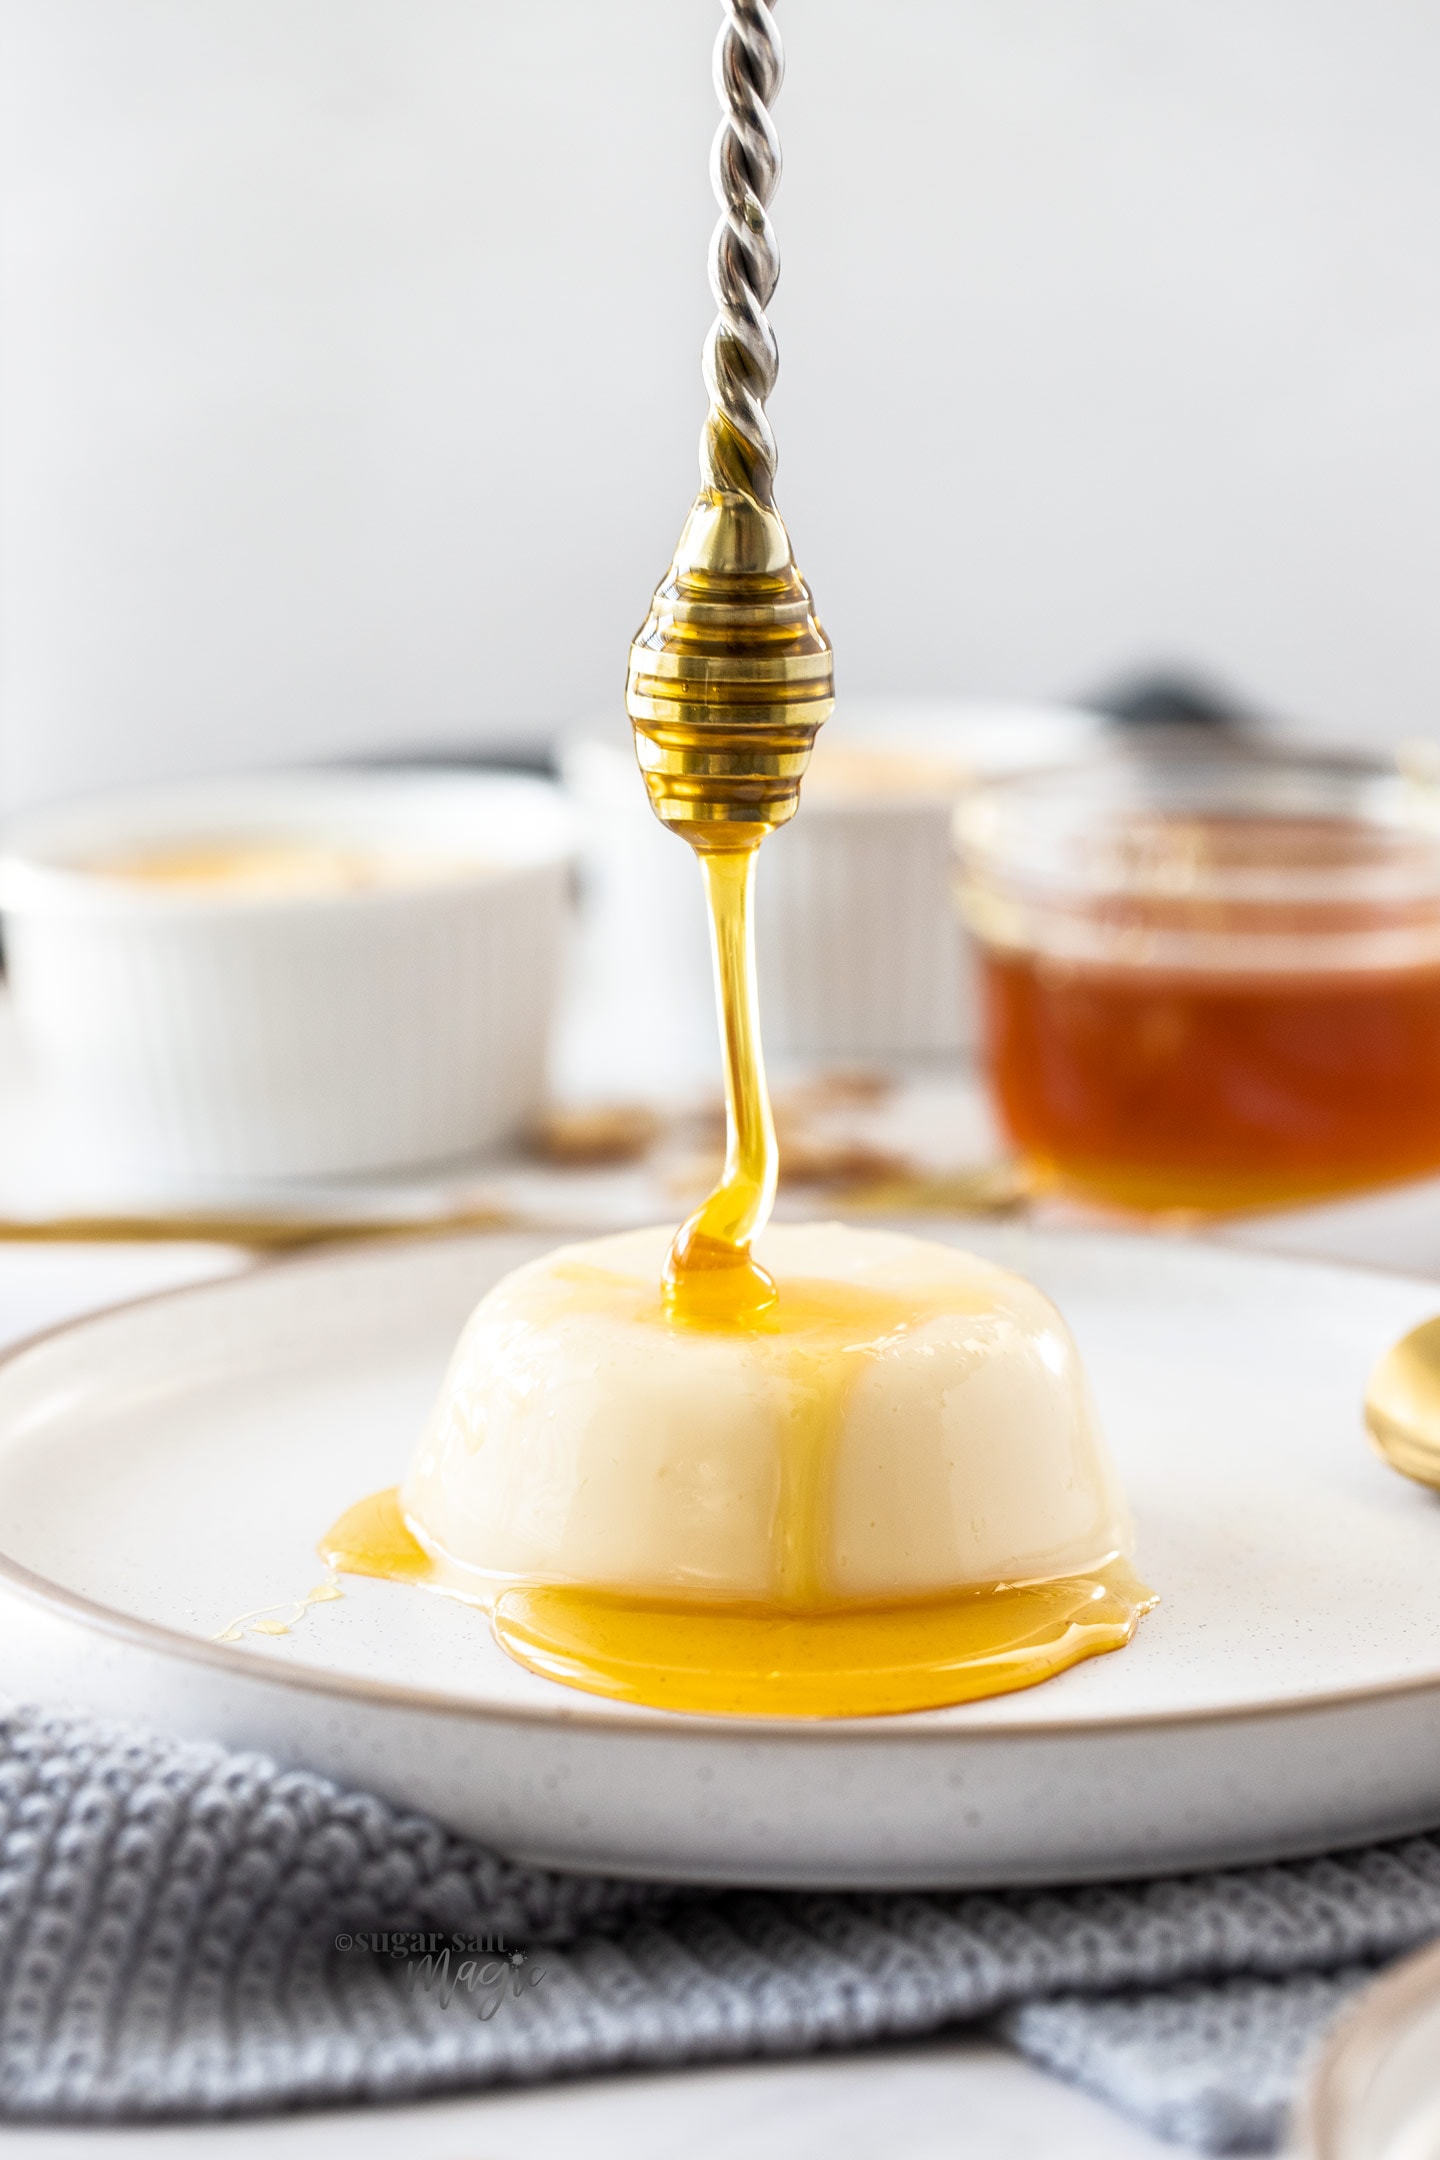 Honey being drizzled onto a panna cotta on a white plate.